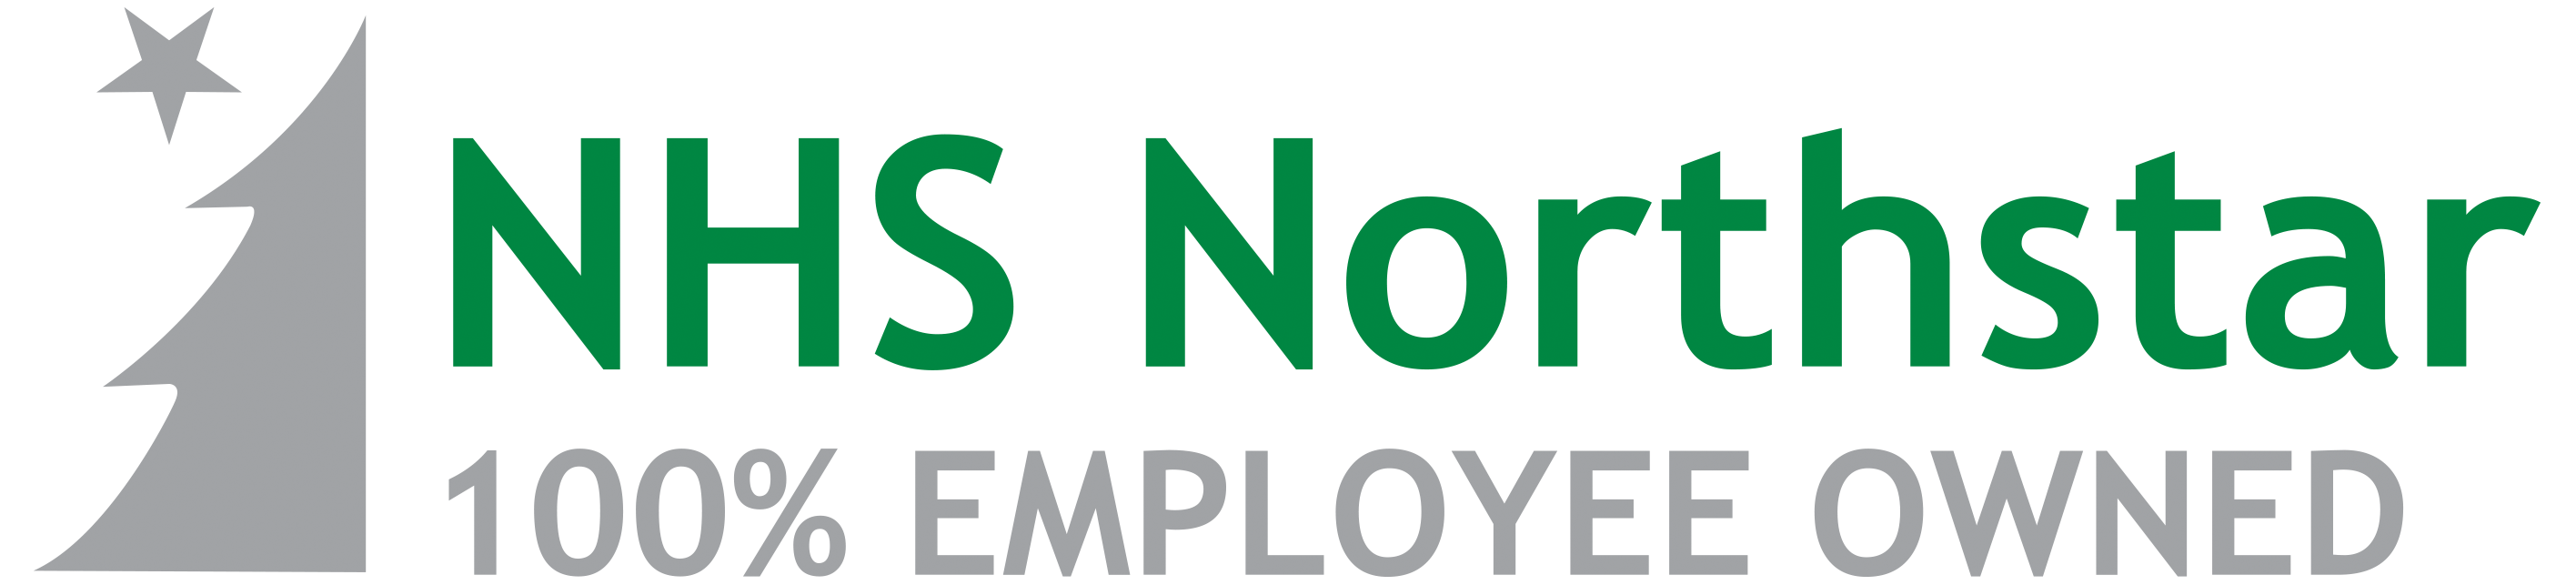 NHS Northstar Specialized Services Logo